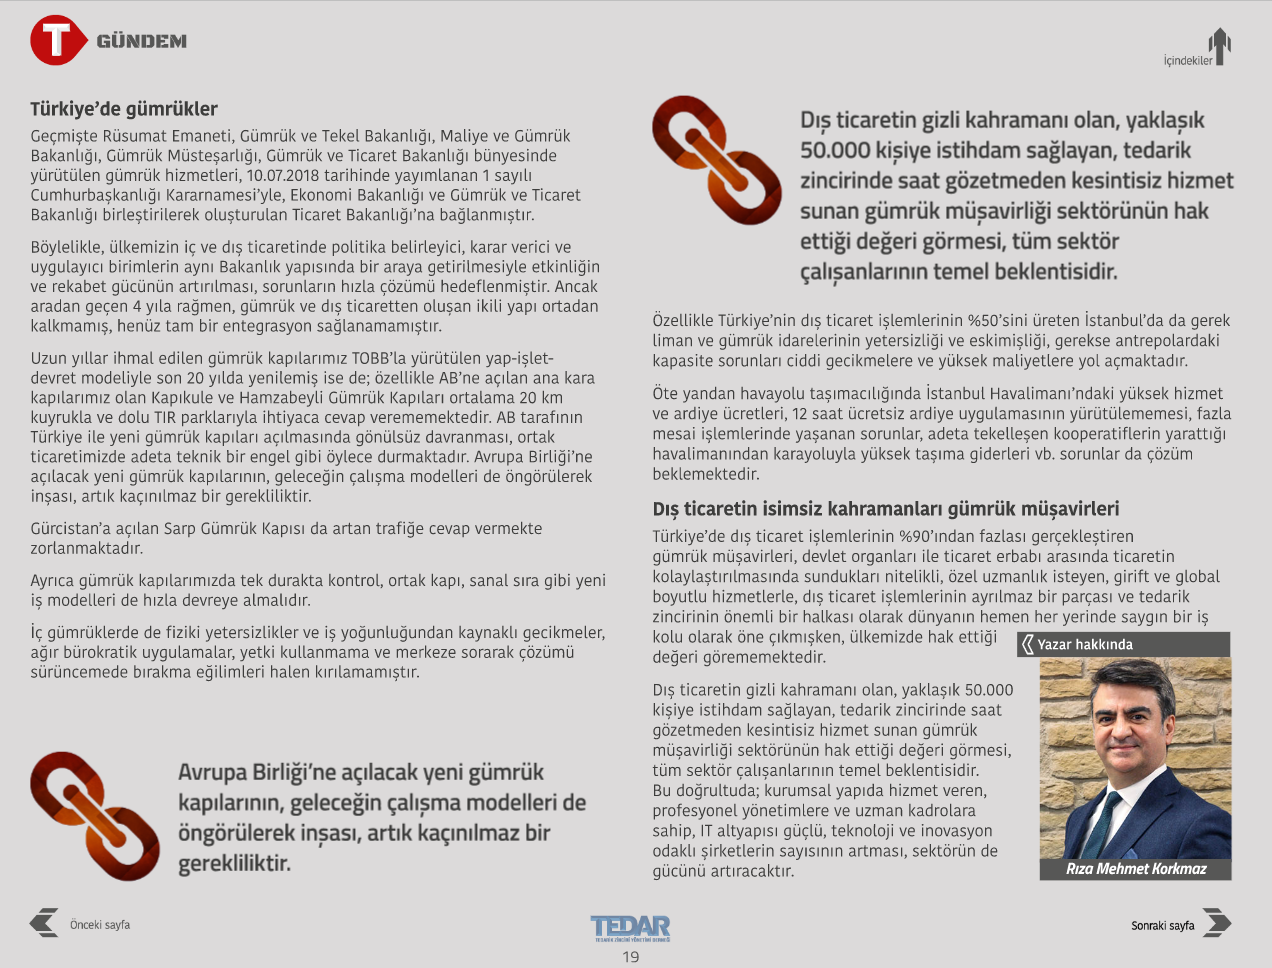 Our General Manager Rıza Mehmet KORKMAZ was featured in TEDAR, the Journal of the Supply Chain Management Association, with his article titled 